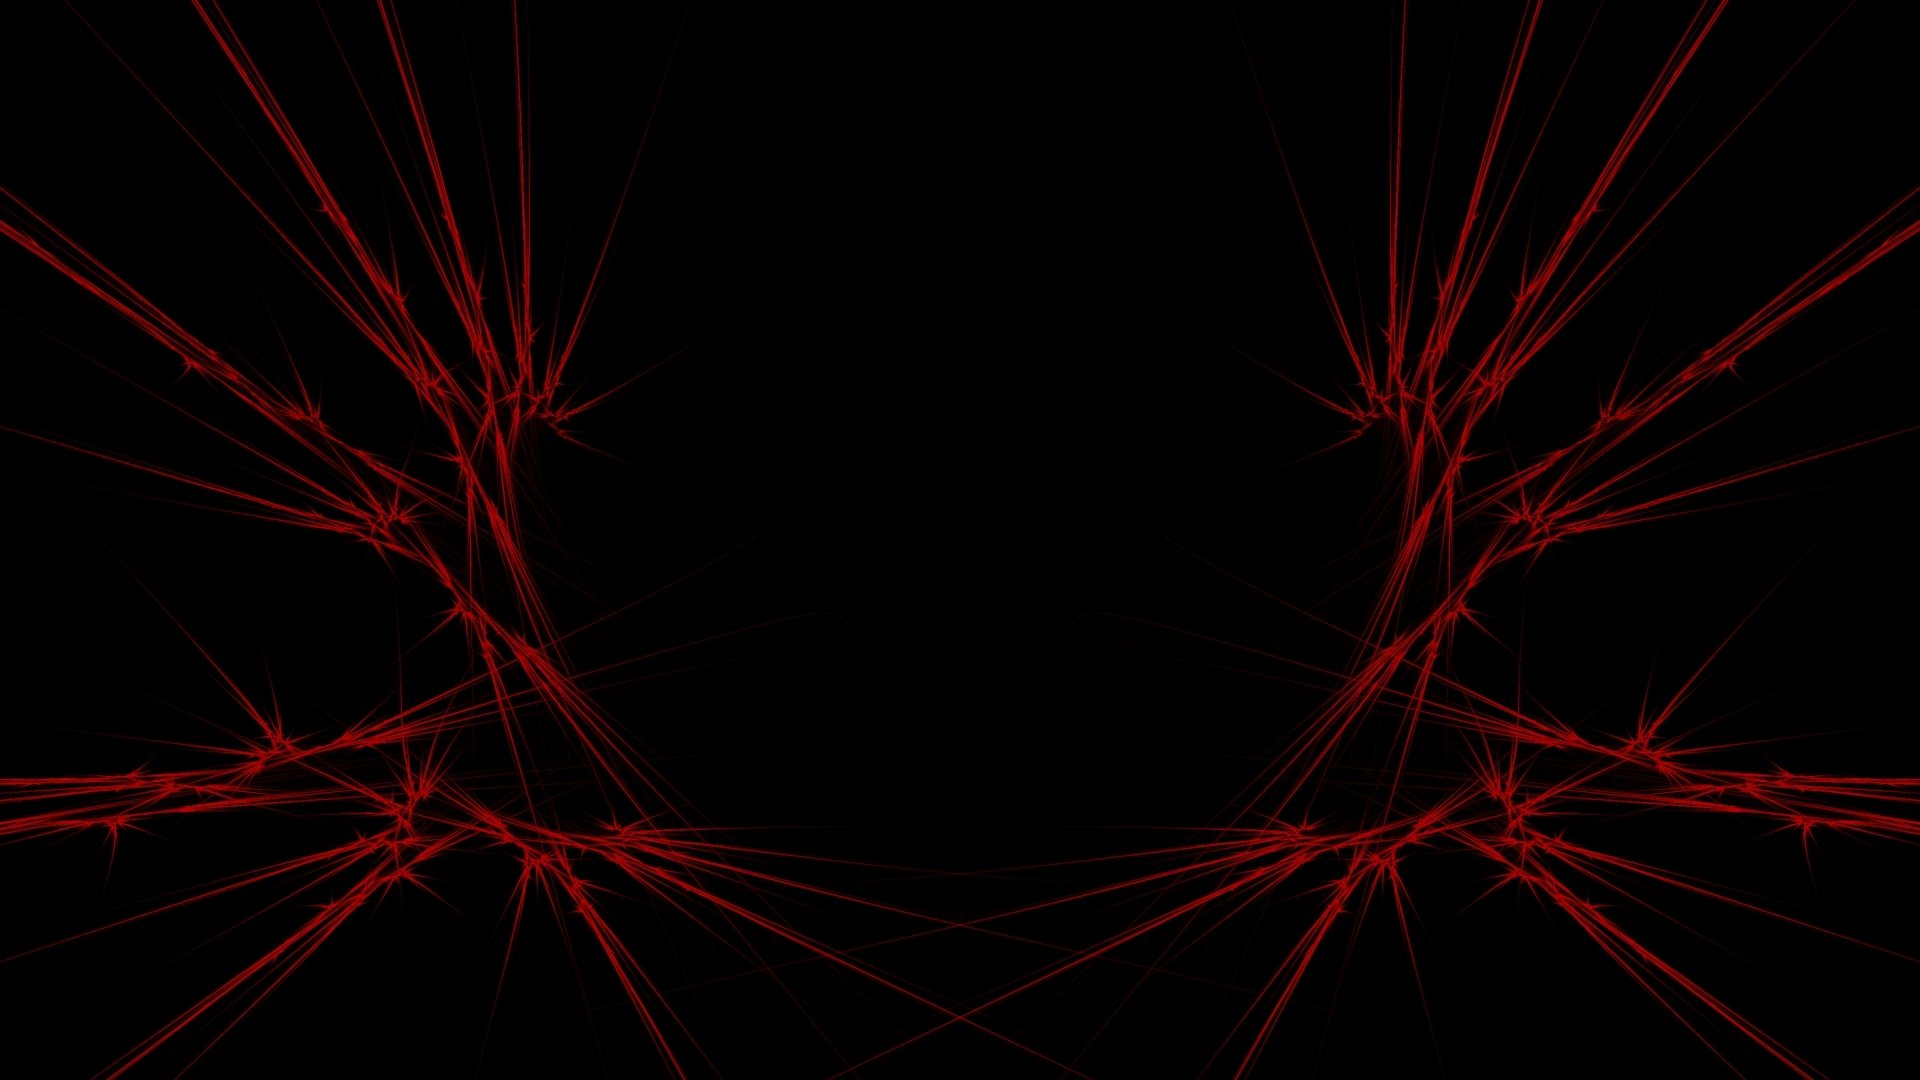  Wallpaper 1920x1080 red black abstract Full HD 1080p HD Background 1920x1080